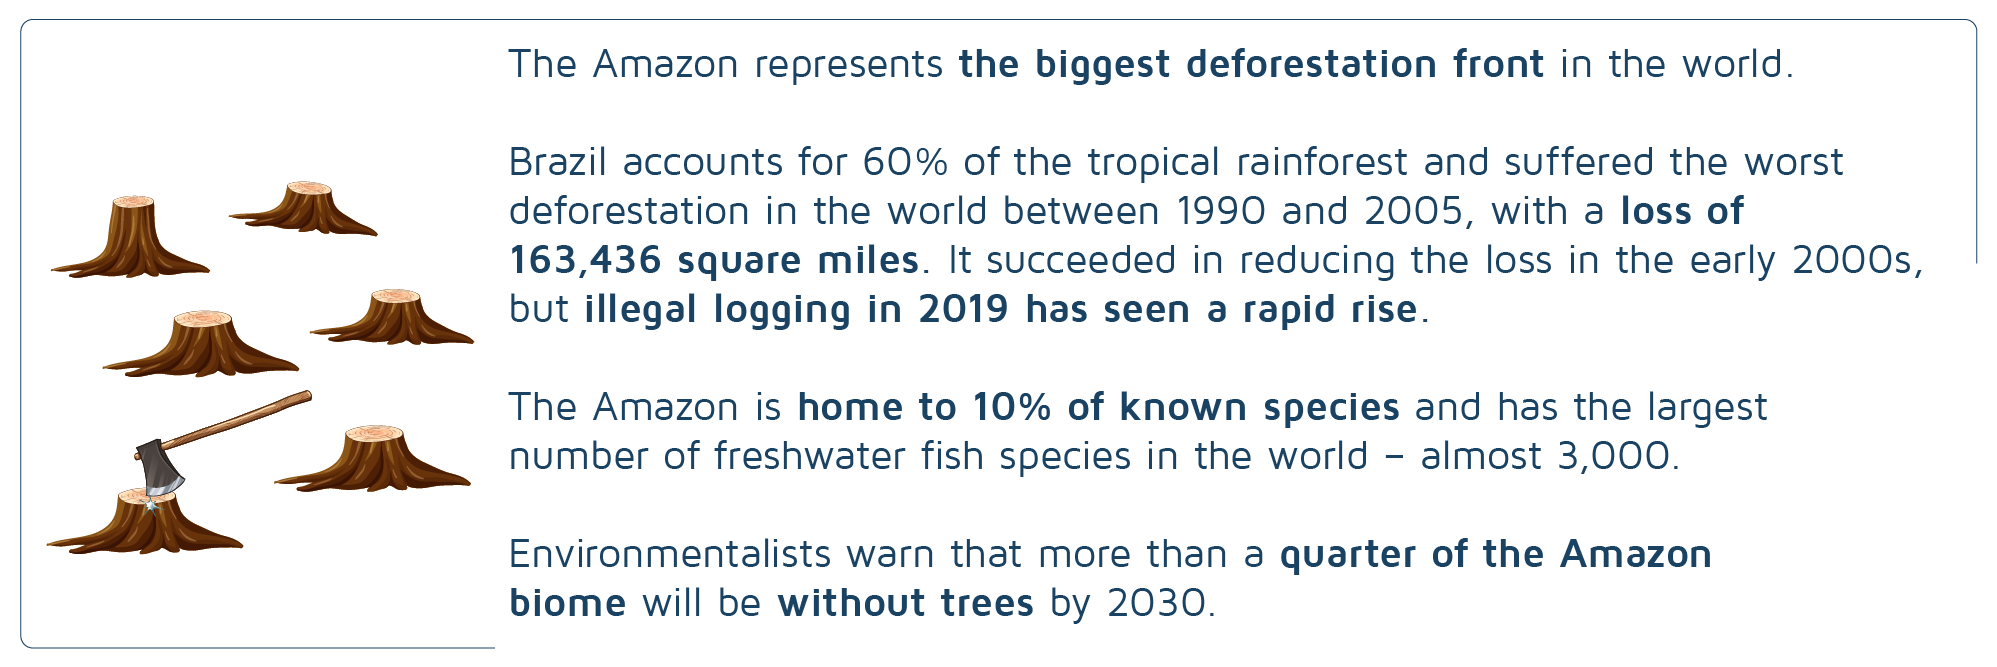 Deforestation in the Amazon is on the rise